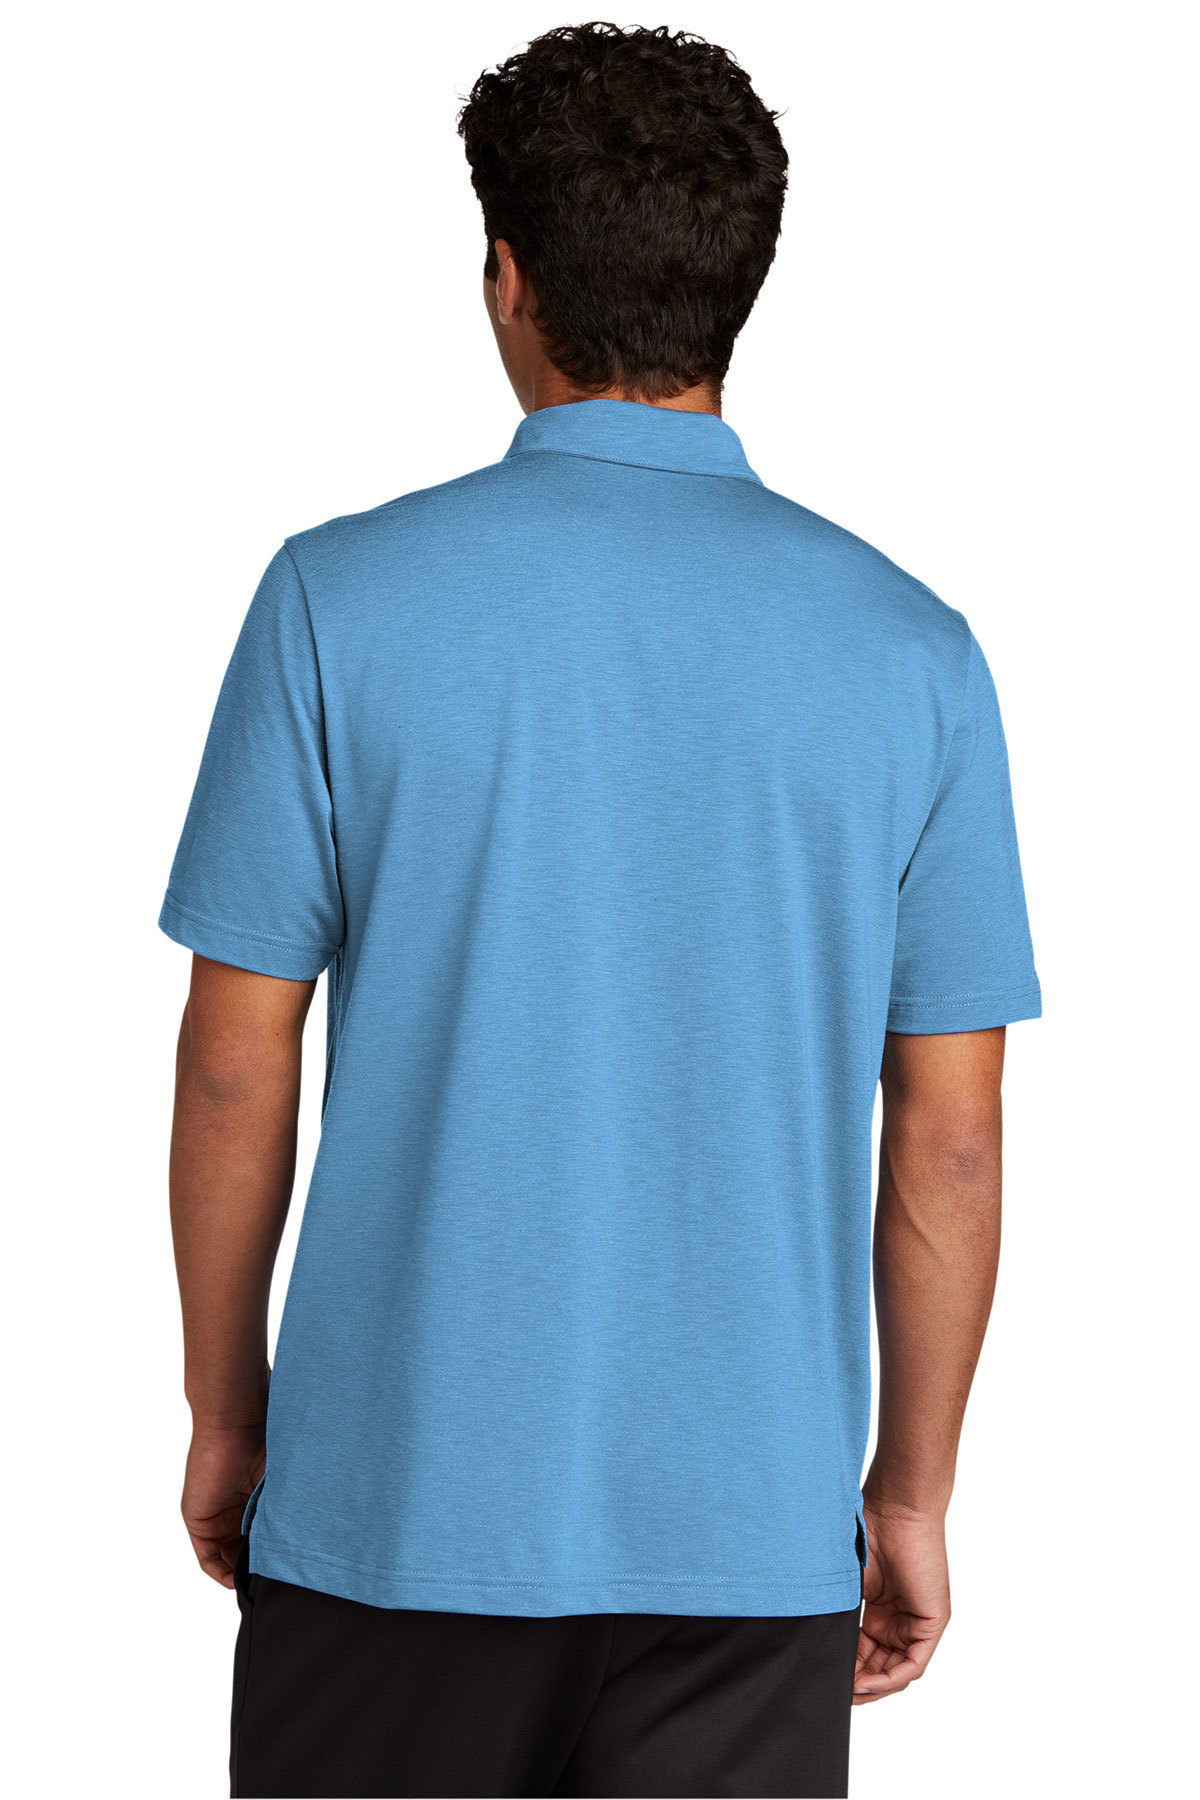 Sport-Tek PosiCharge Strive Polo | Product | Company Casuals